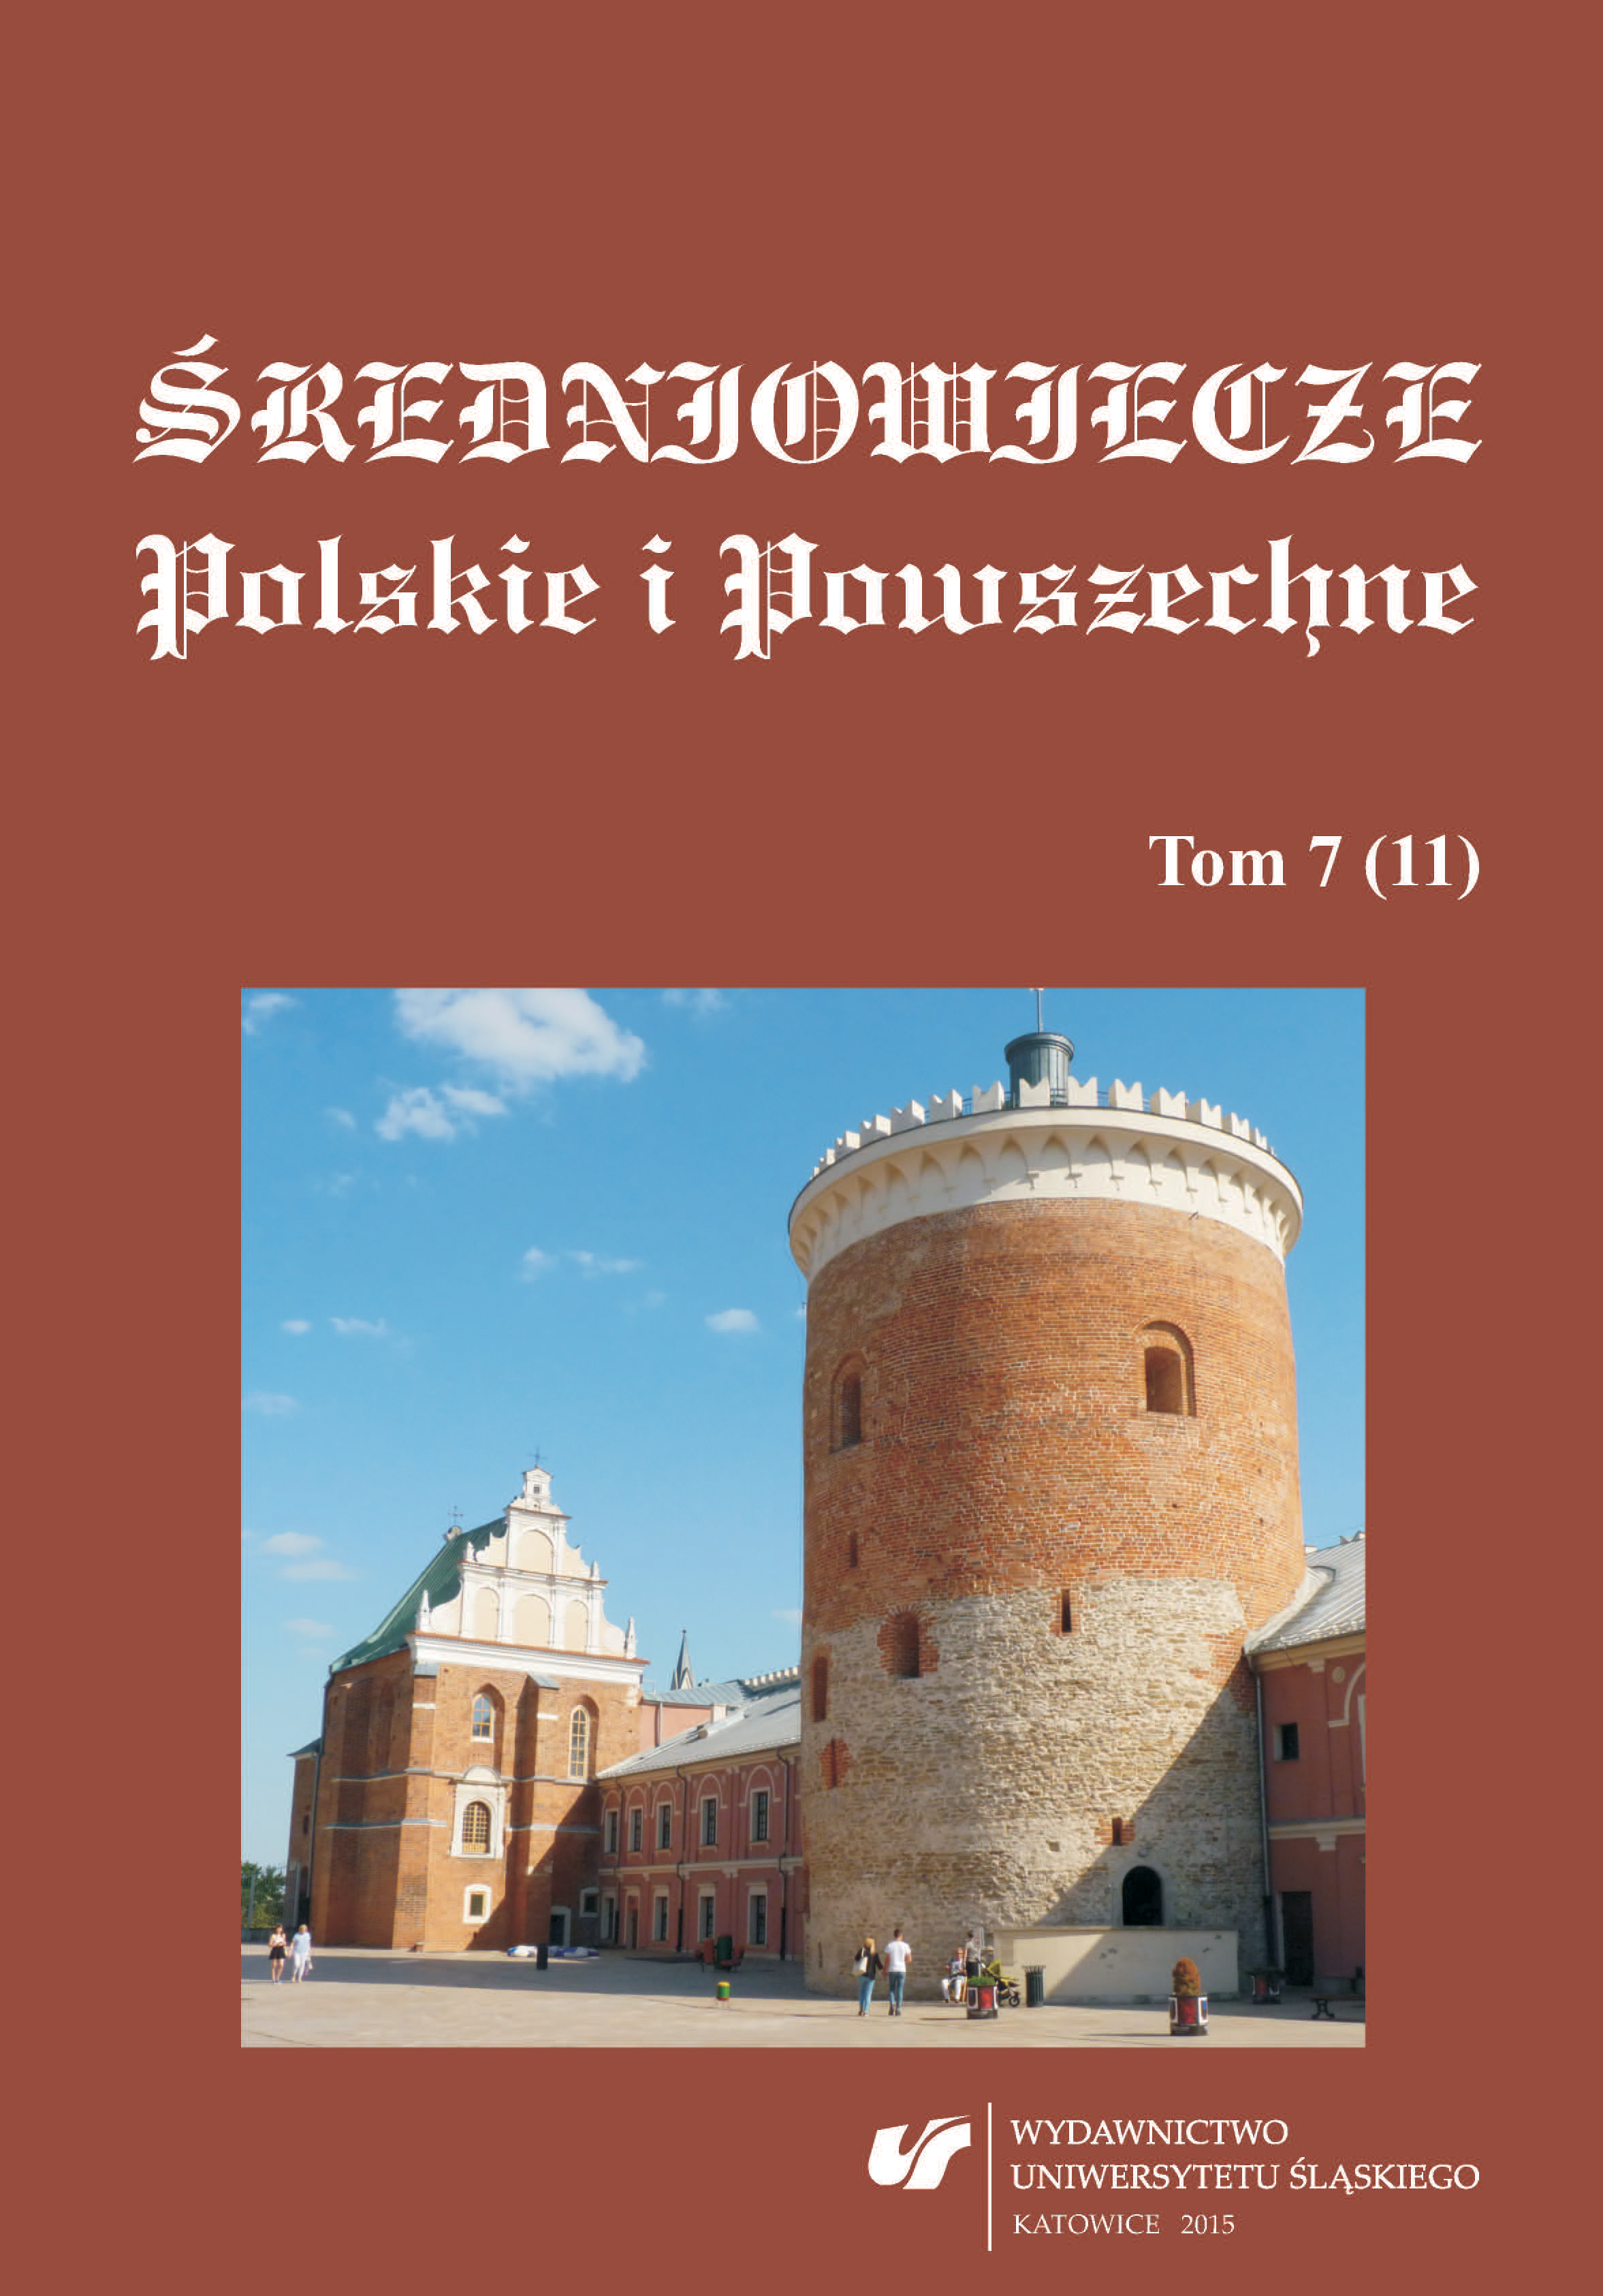 Political ideological programme of Władysław Jagiełło’s tomb and the time of its execution Cover Image